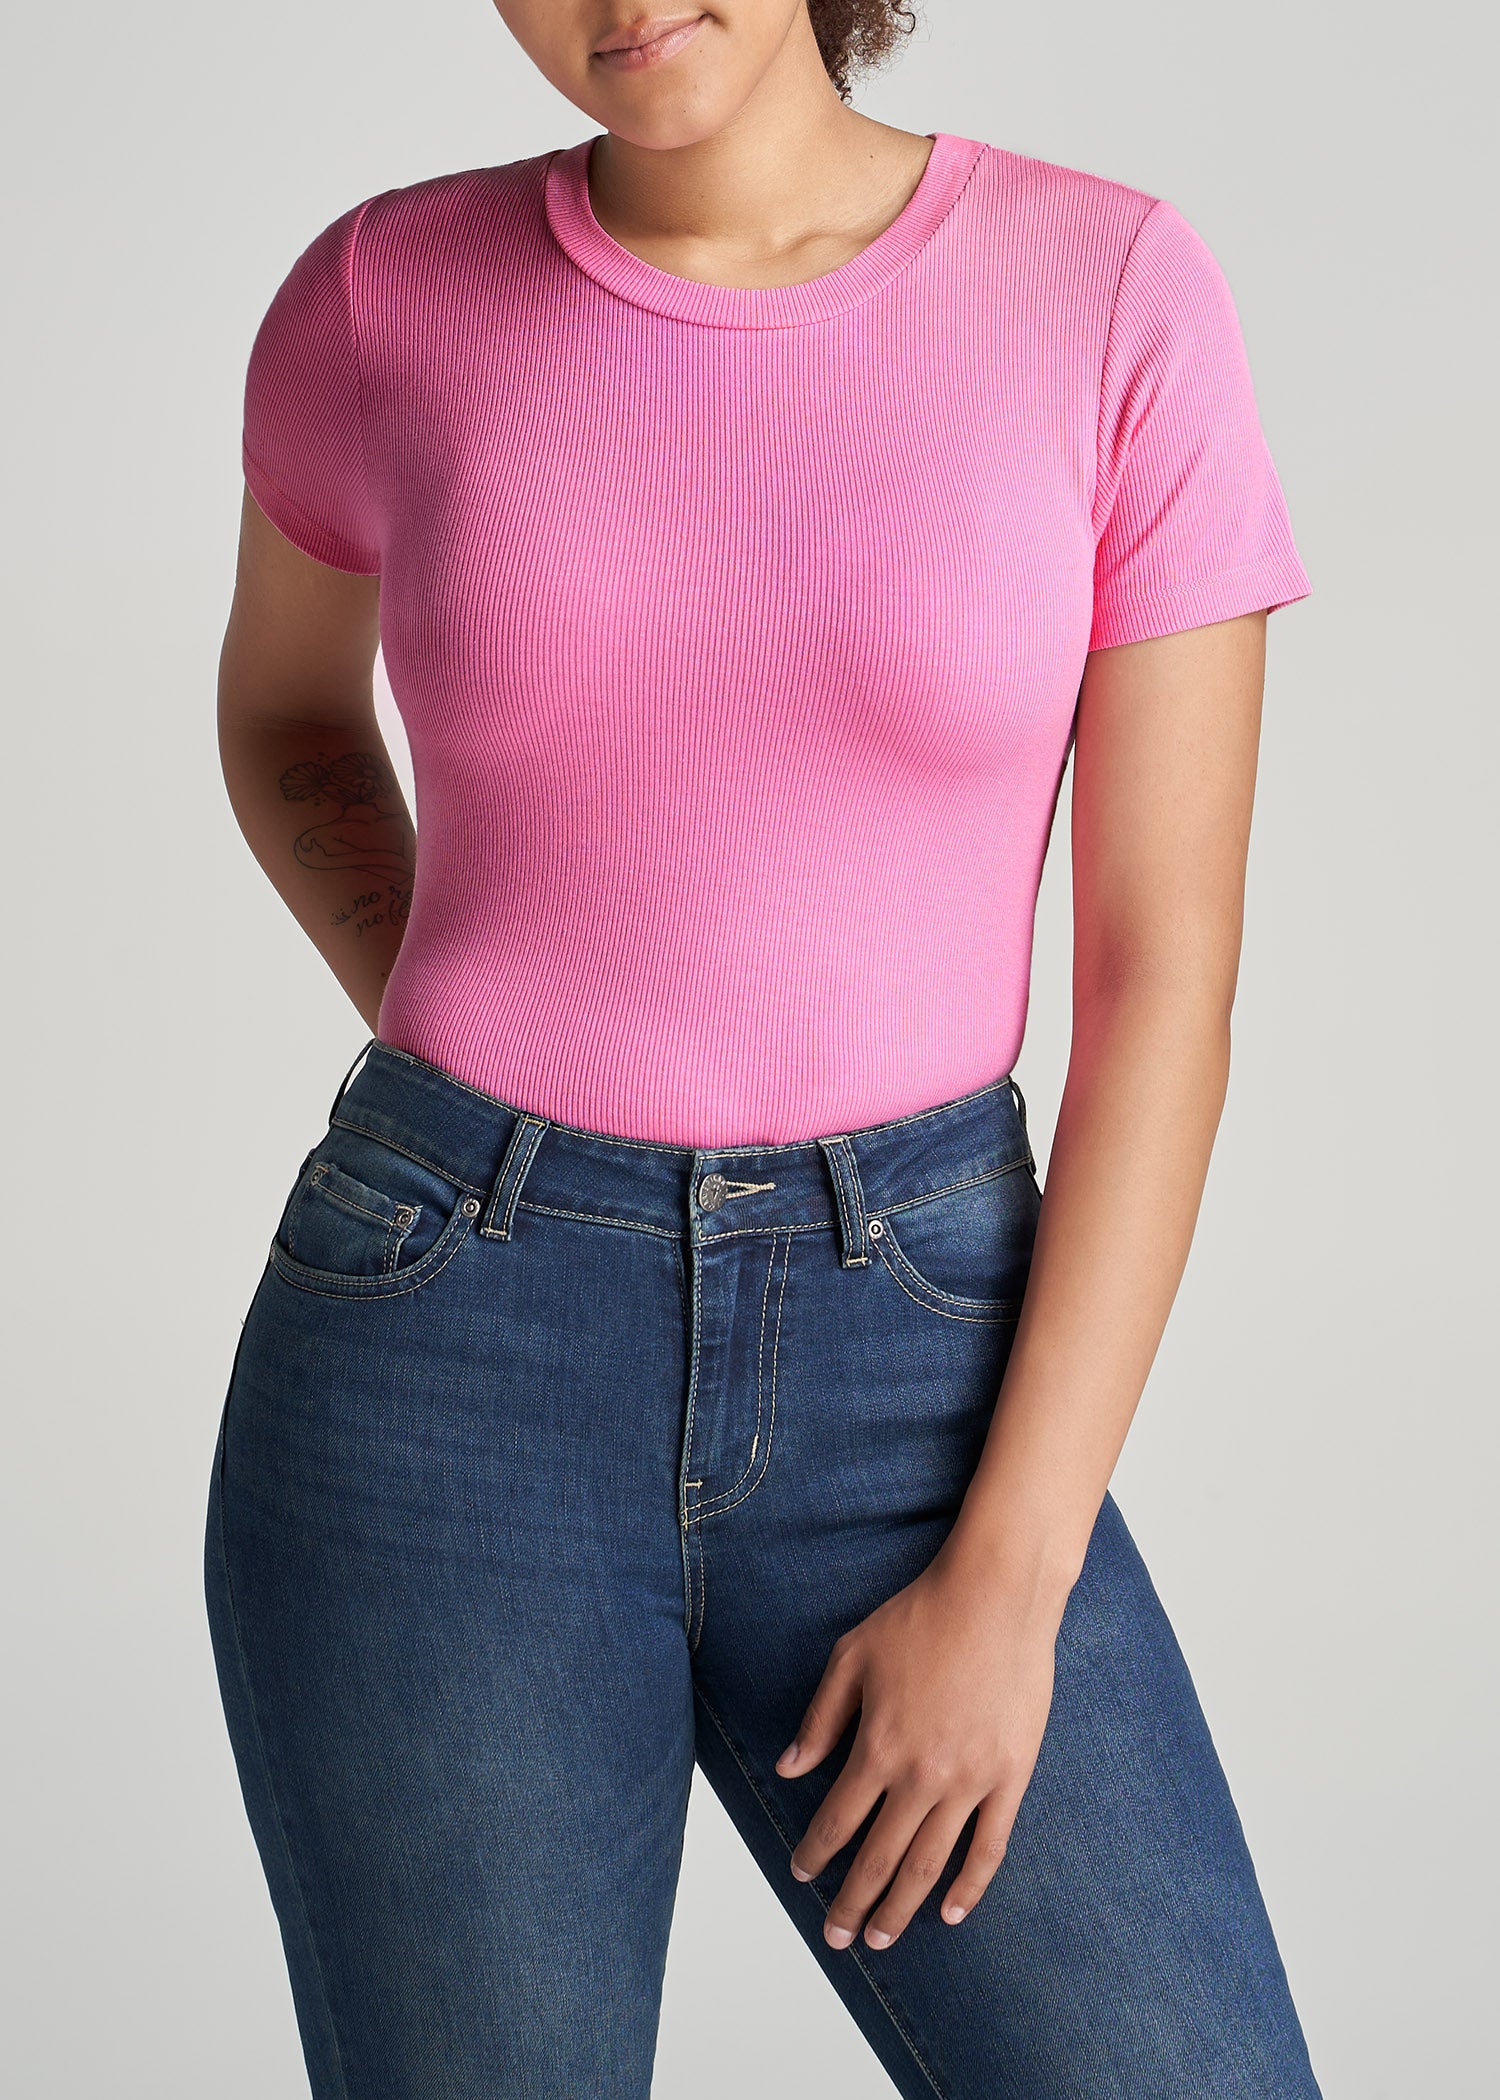 American Tall Fitted Ribbed Tee in Bubblegum Pink - Women's Tall T-shirts XL / Tall / Bubblegum Pink